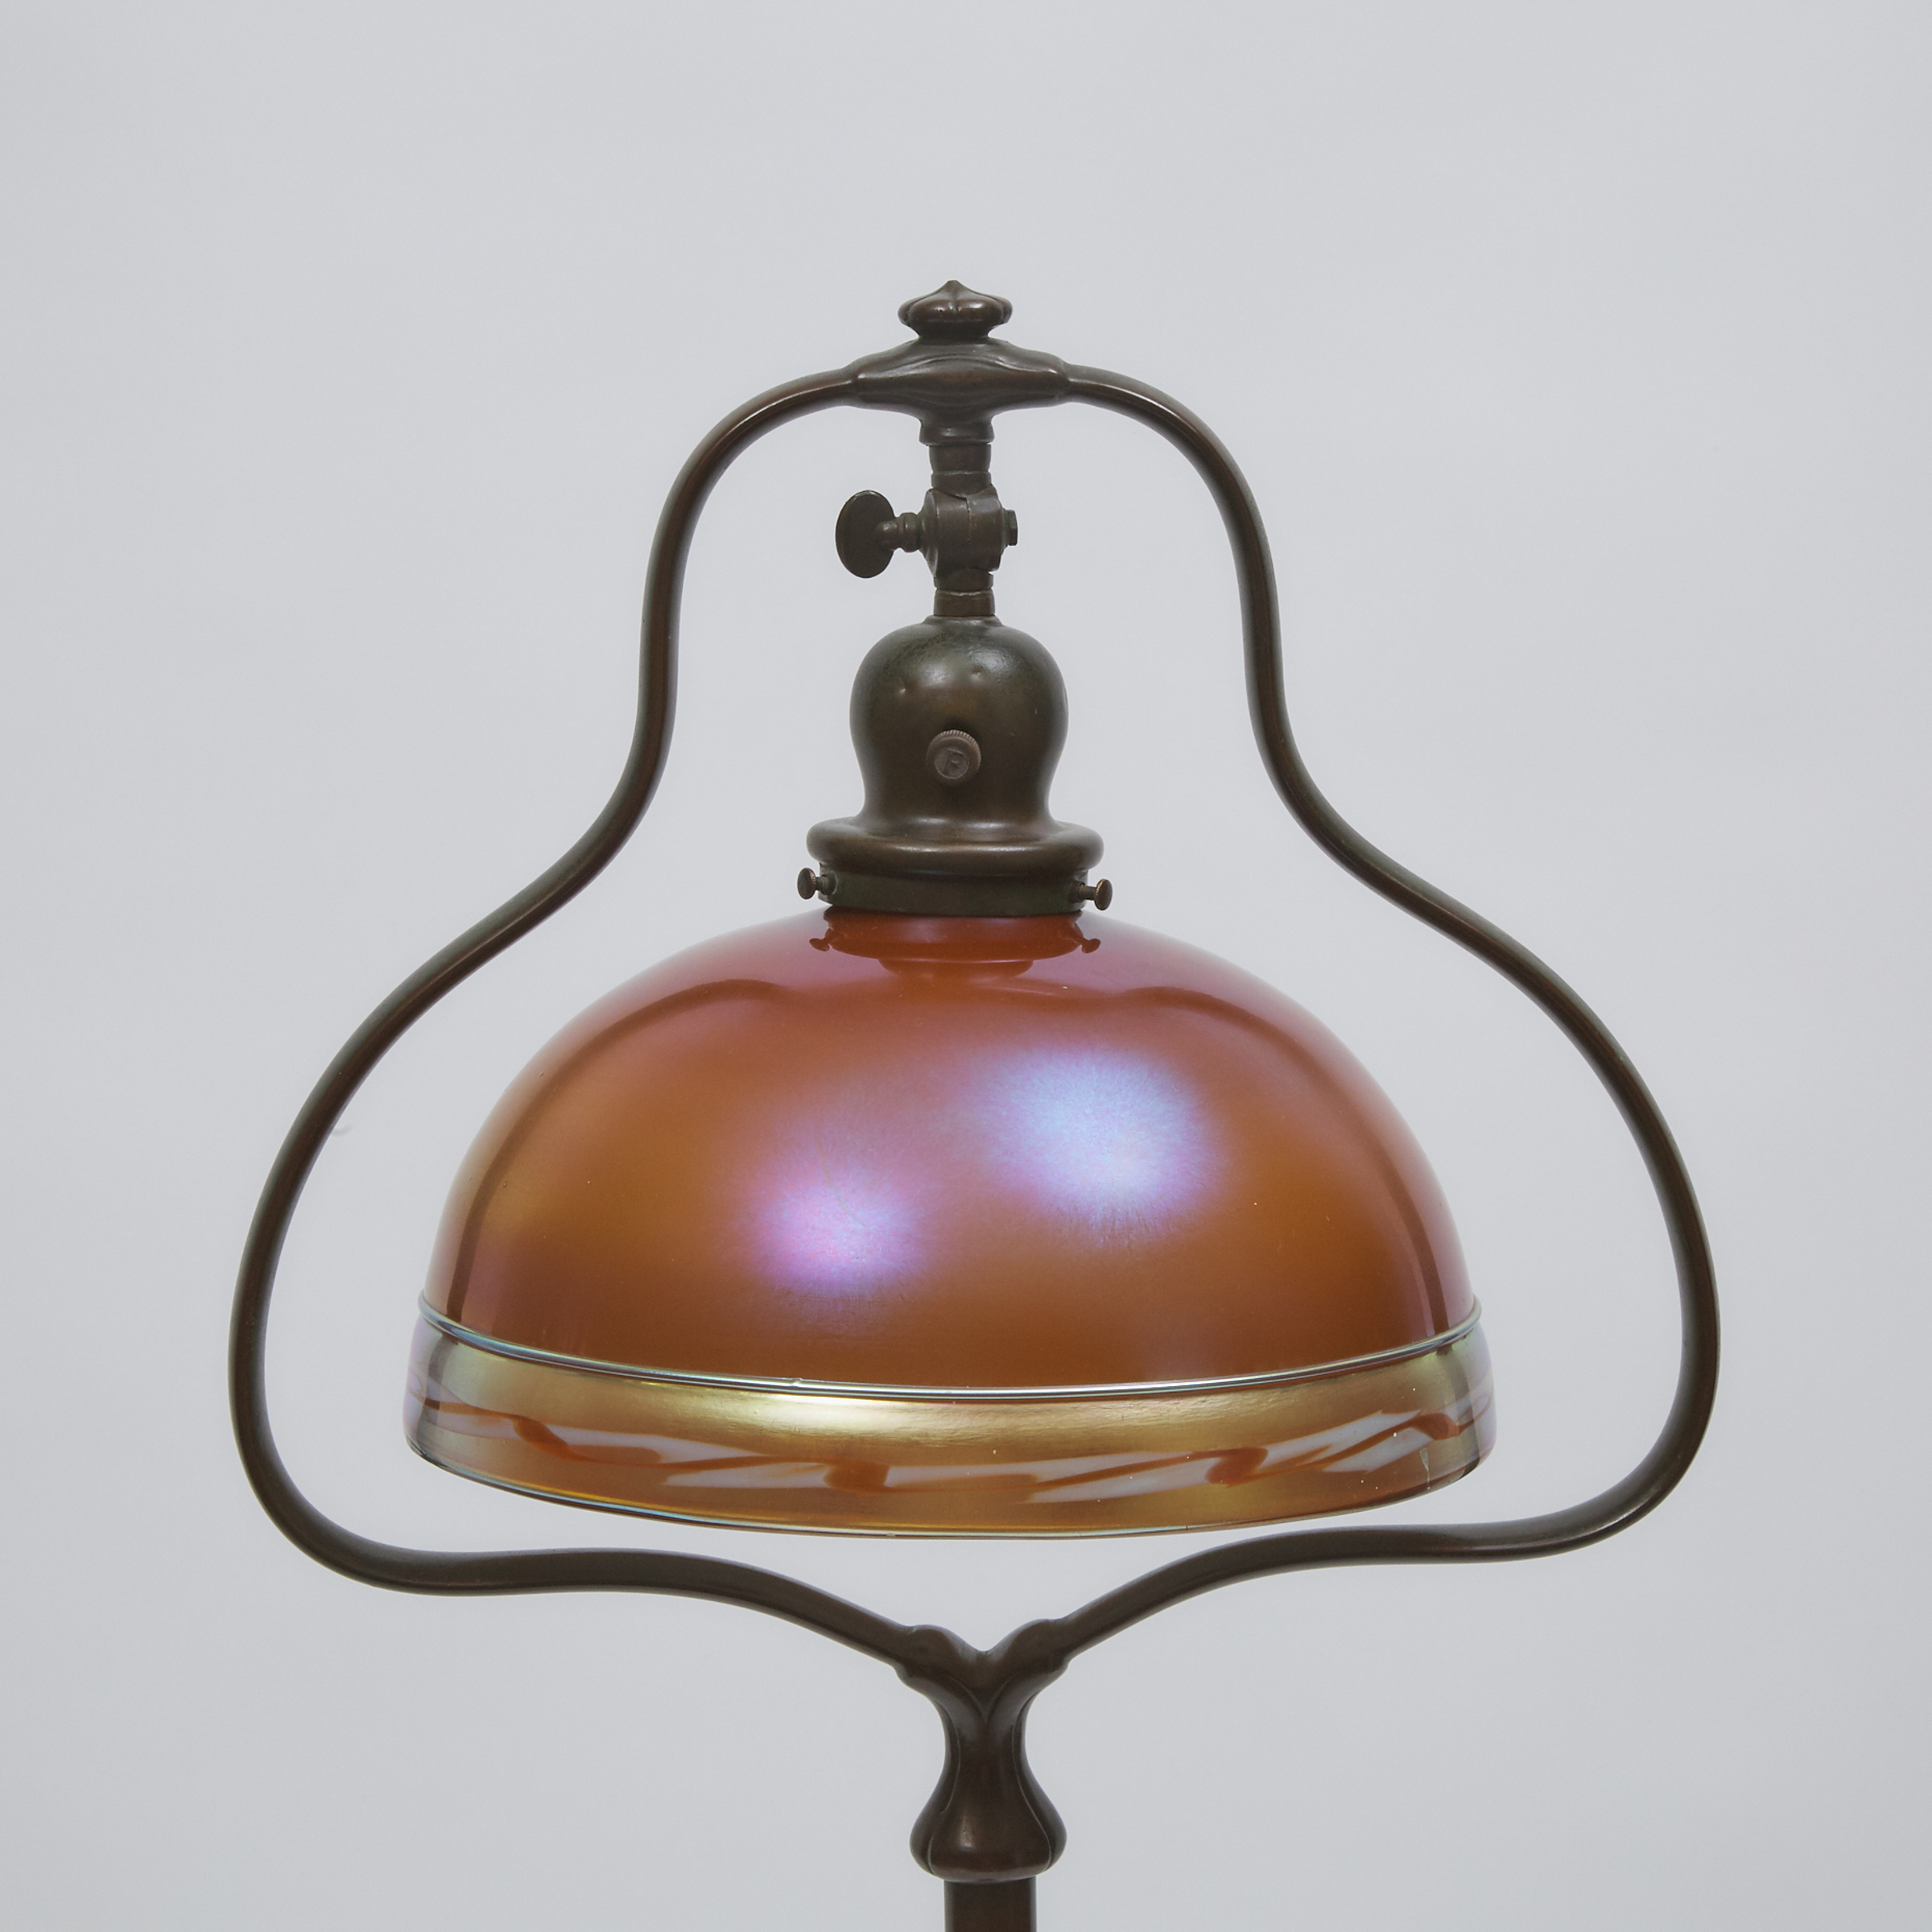 Handel Bronze Floor Lamp with a Steuben Glass Shade, early 20th century